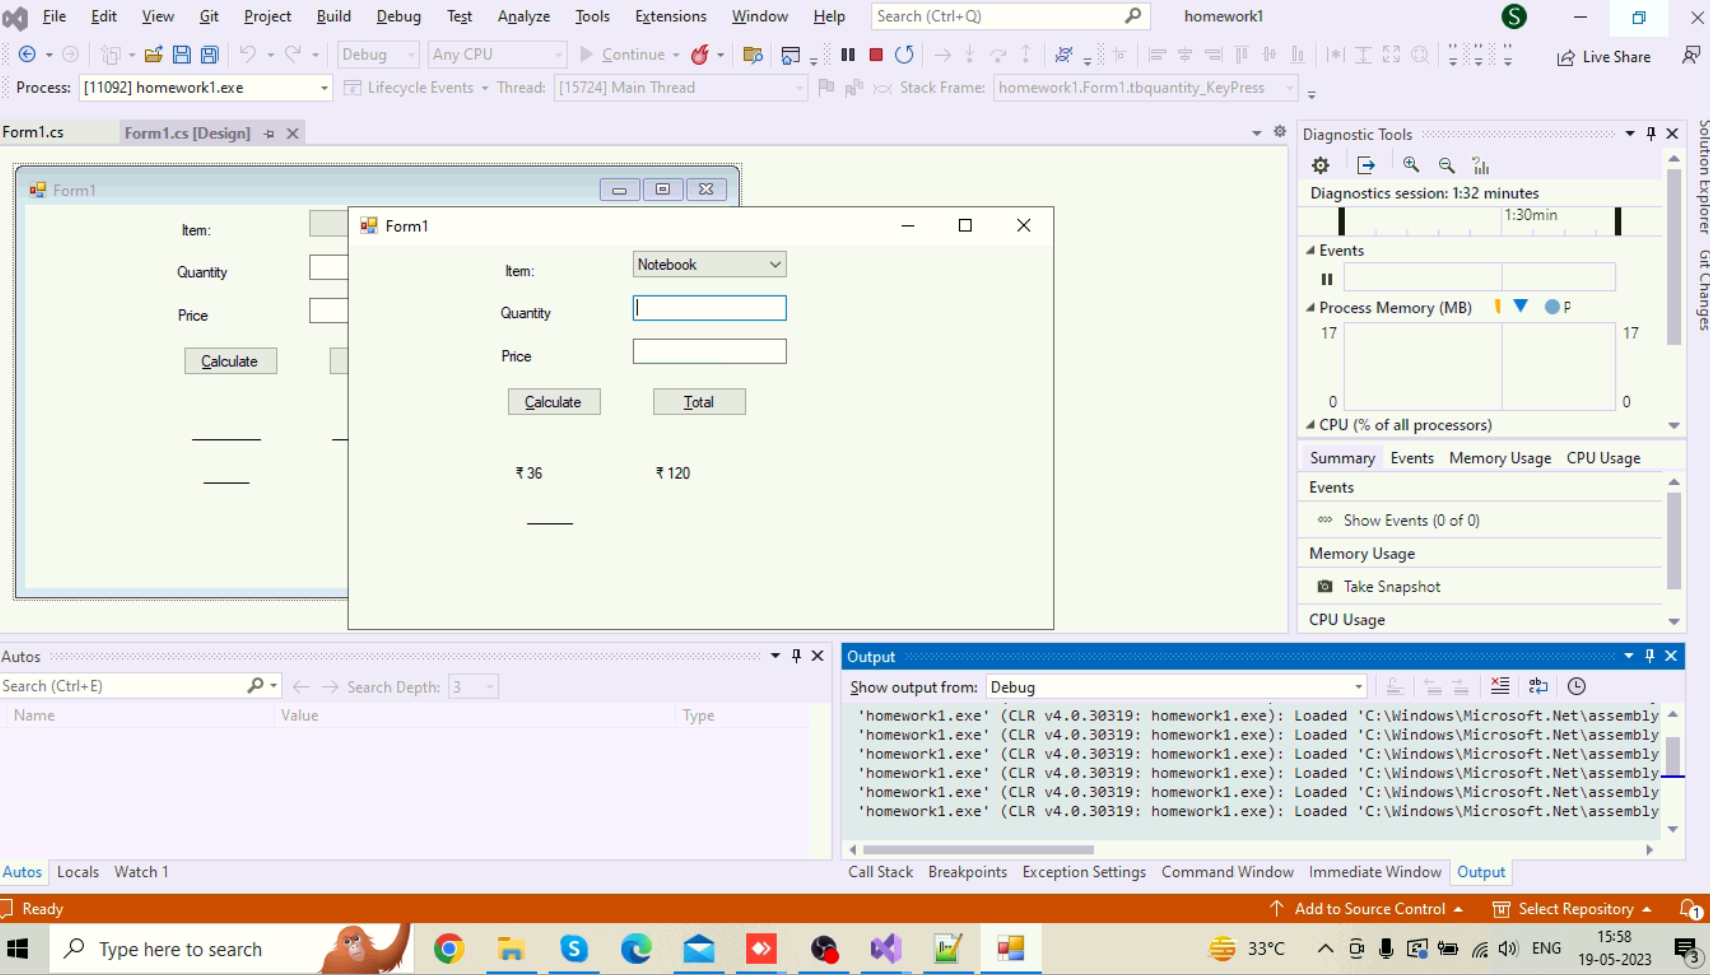 Building a Simple Billing System in C# using Windows Forms